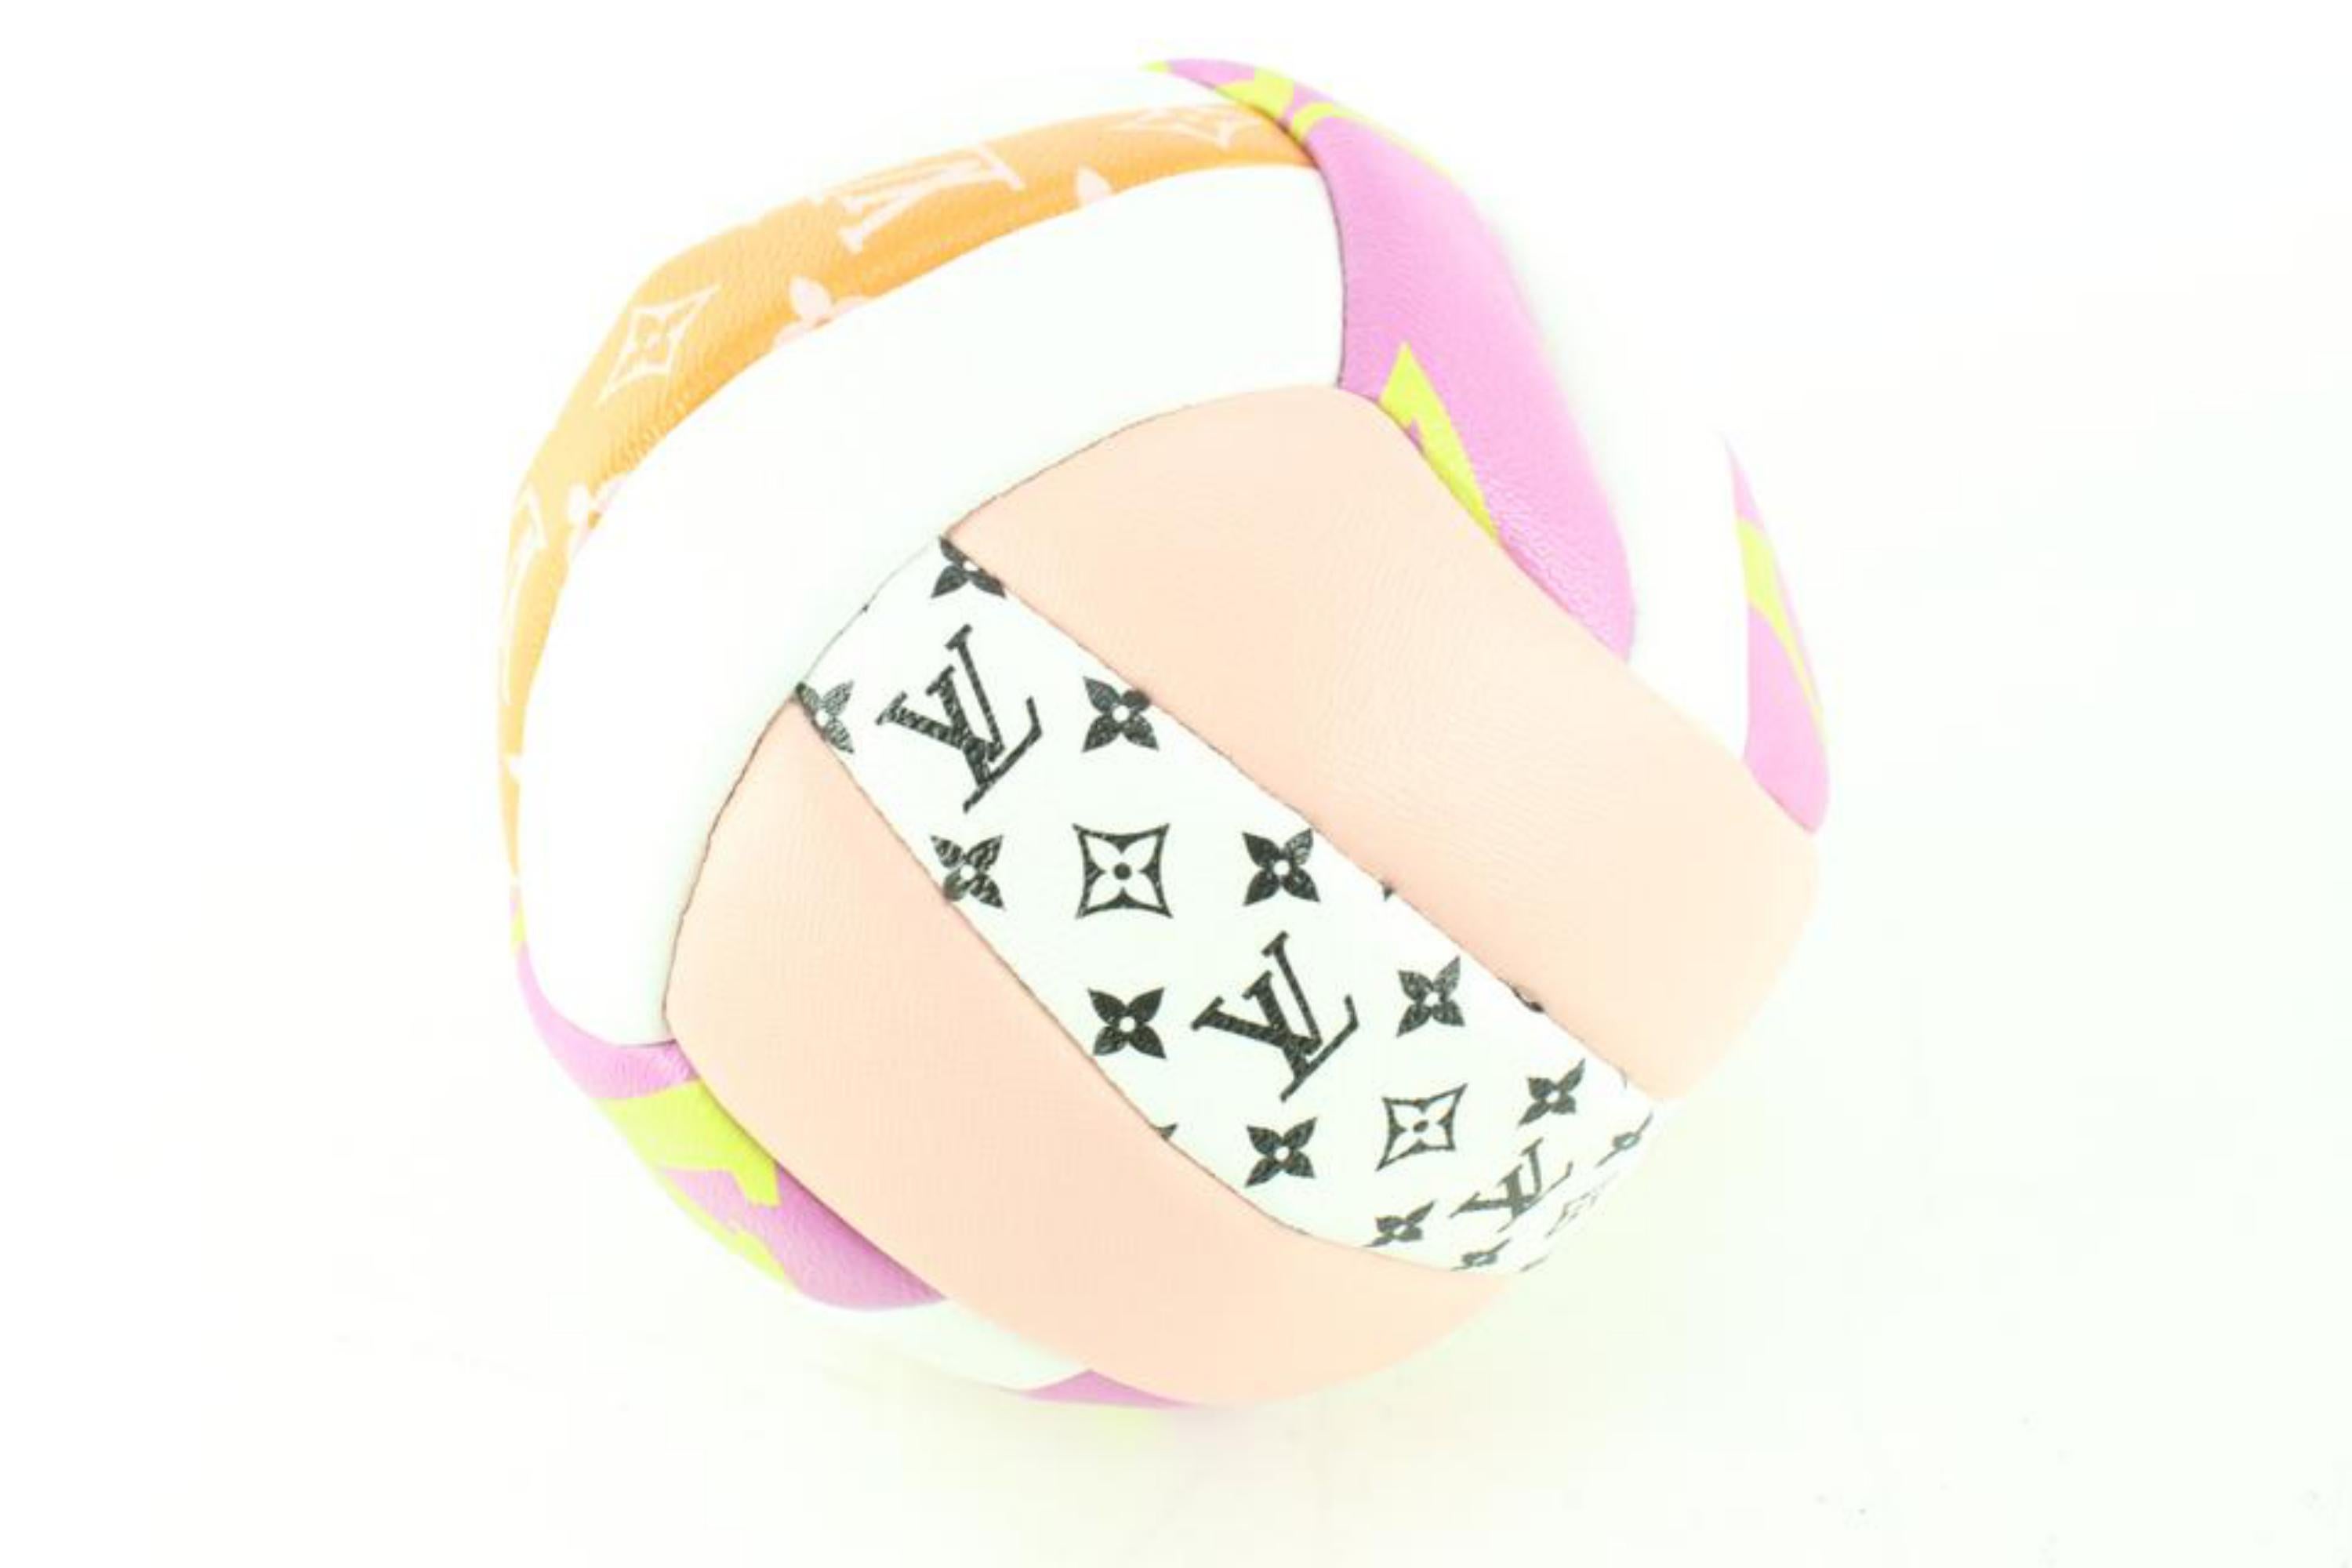 Louis Vuitton SS20 Limited Pink x Orange Monogram Giant Volleyball 39lk62s In New Condition For Sale In Dix hills, NY